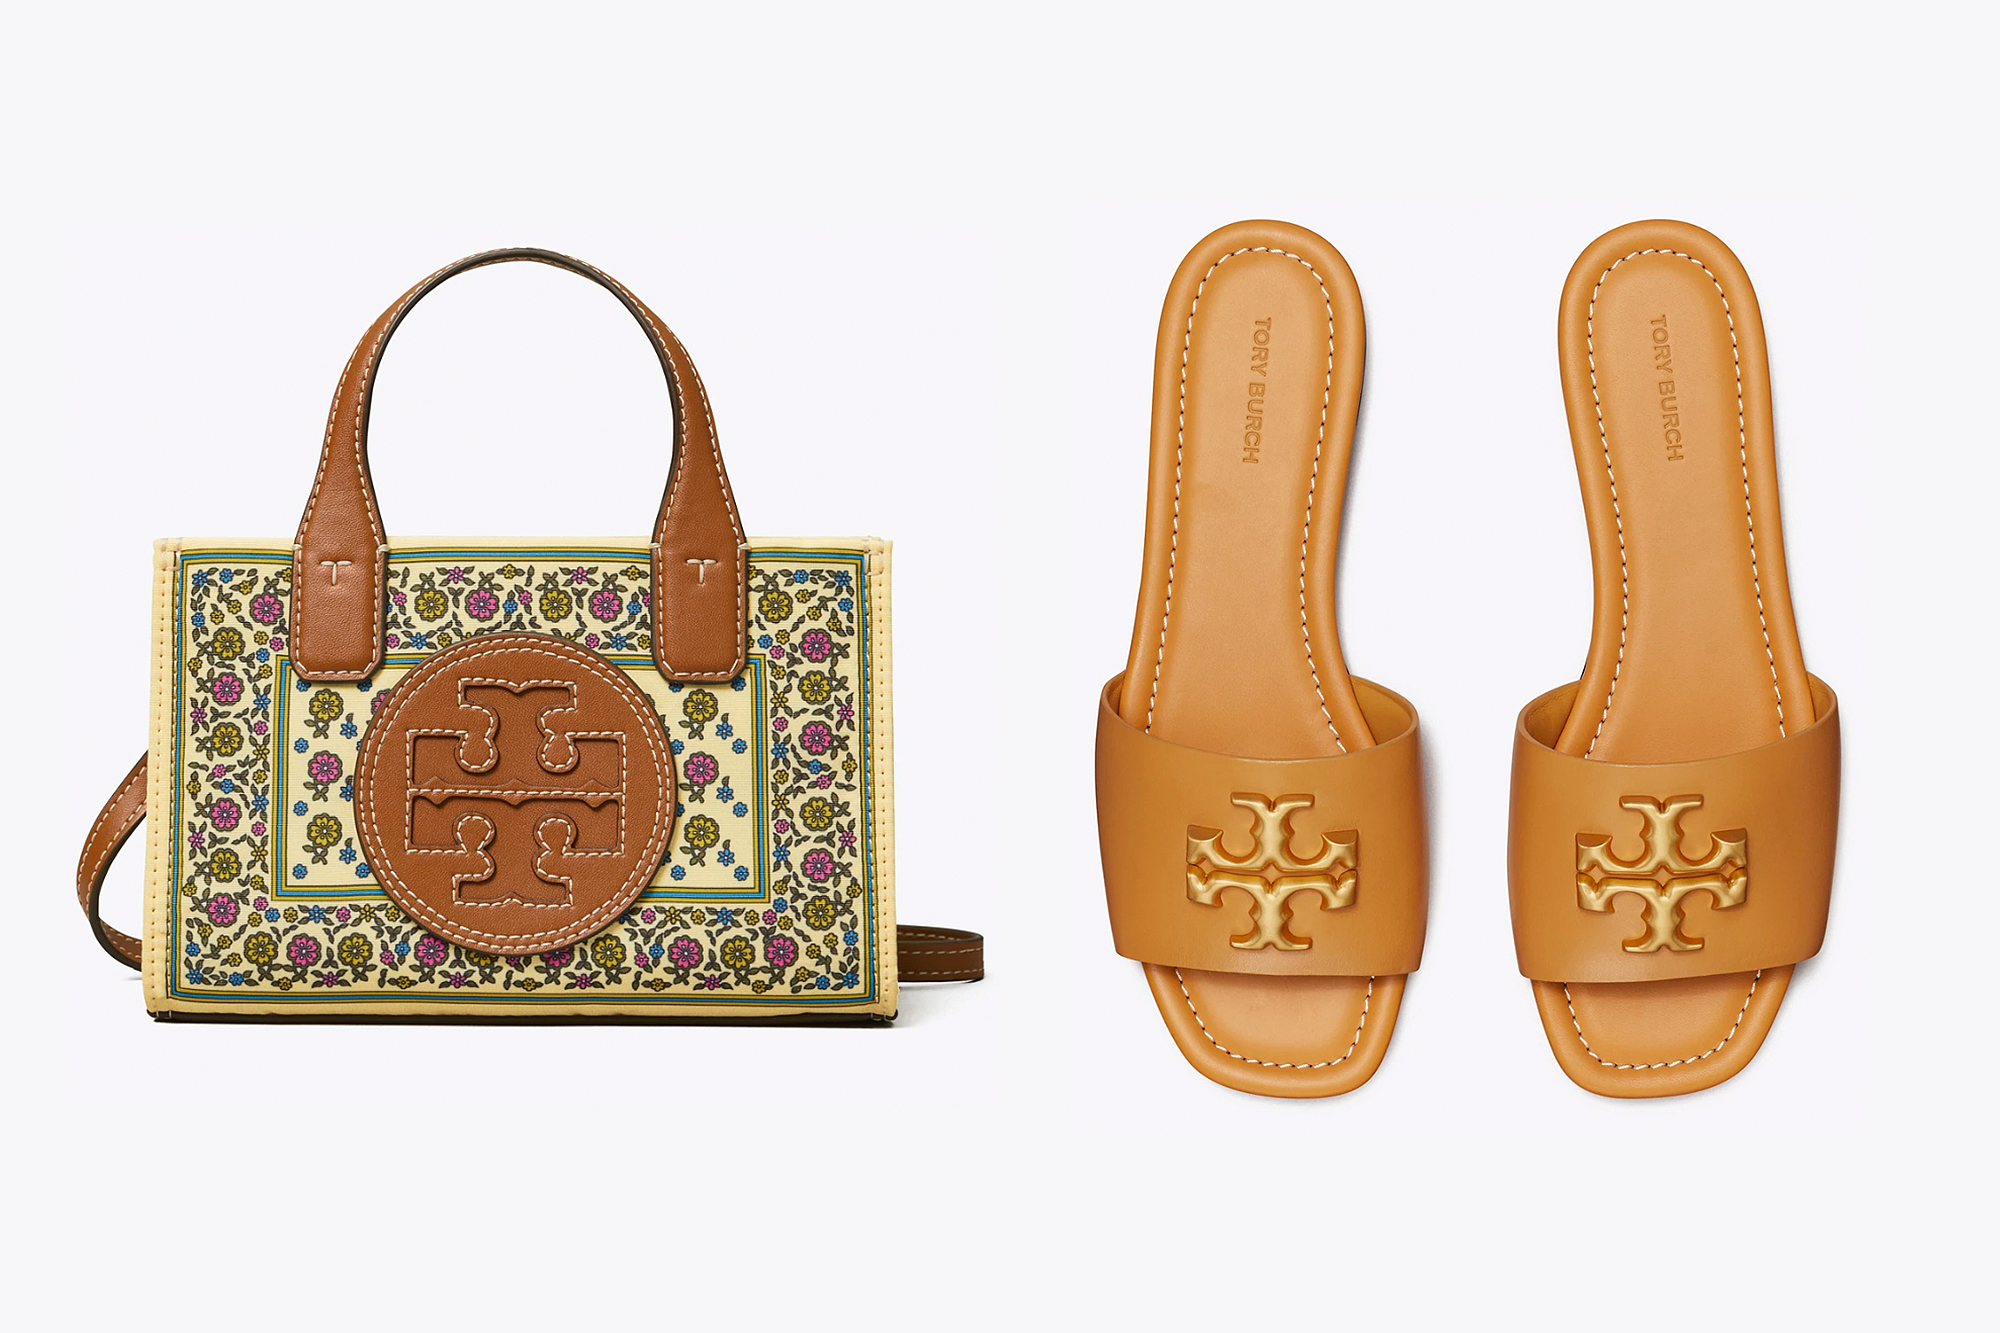 What can you say about Tory Burch? : r/handbags